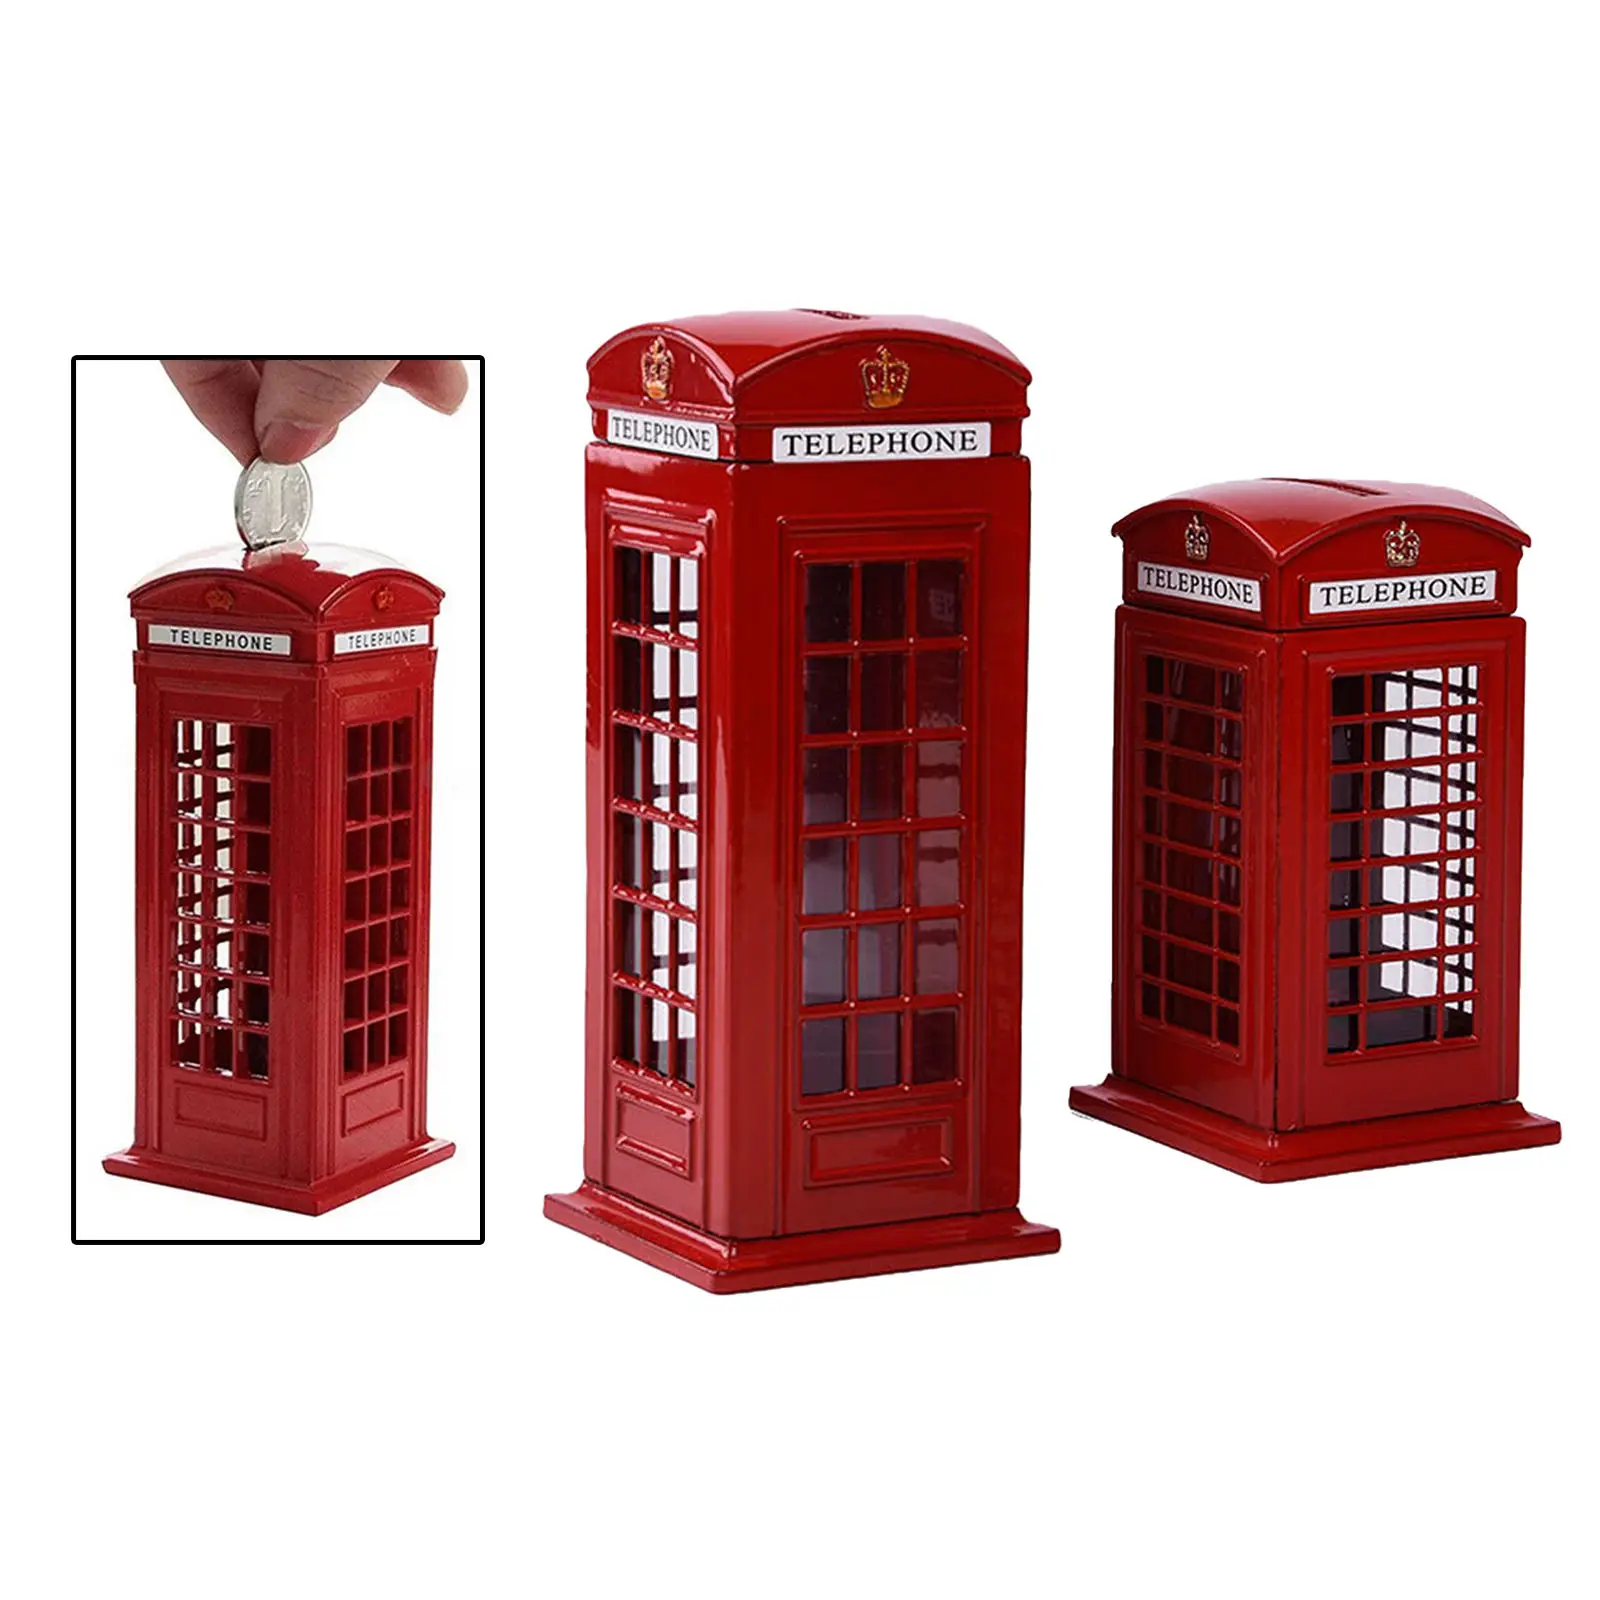 Metal Red British English London Telephone Booth Bank Coin Bank Saving Pot Piggy Bank Red Phone Booth Box Decor Container